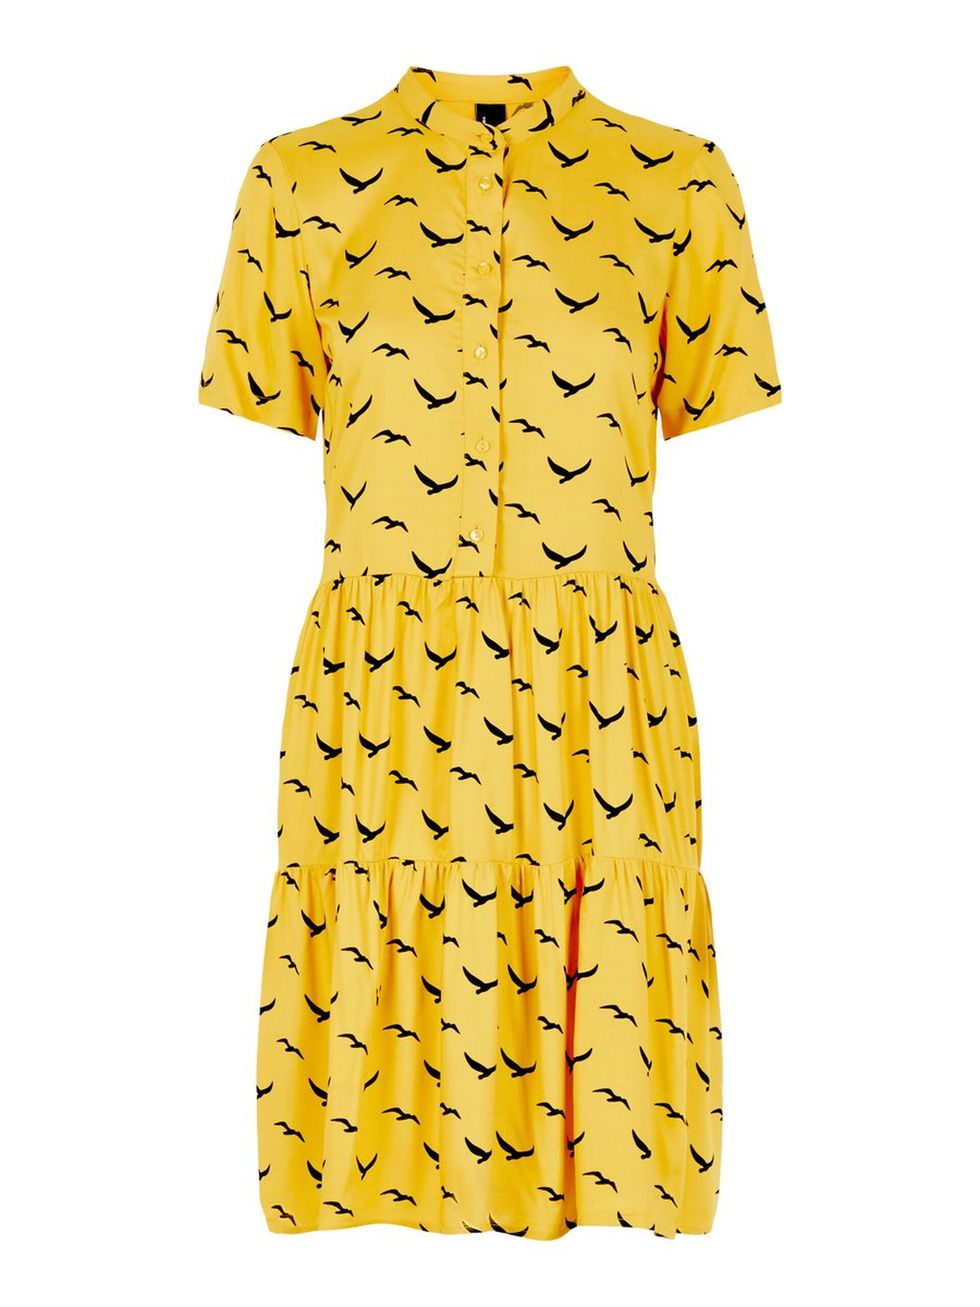 Clothing, Day dress, Yellow, Dress, Sleeve, Orange, Cover-up, Pattern, Collar, Pattern, 